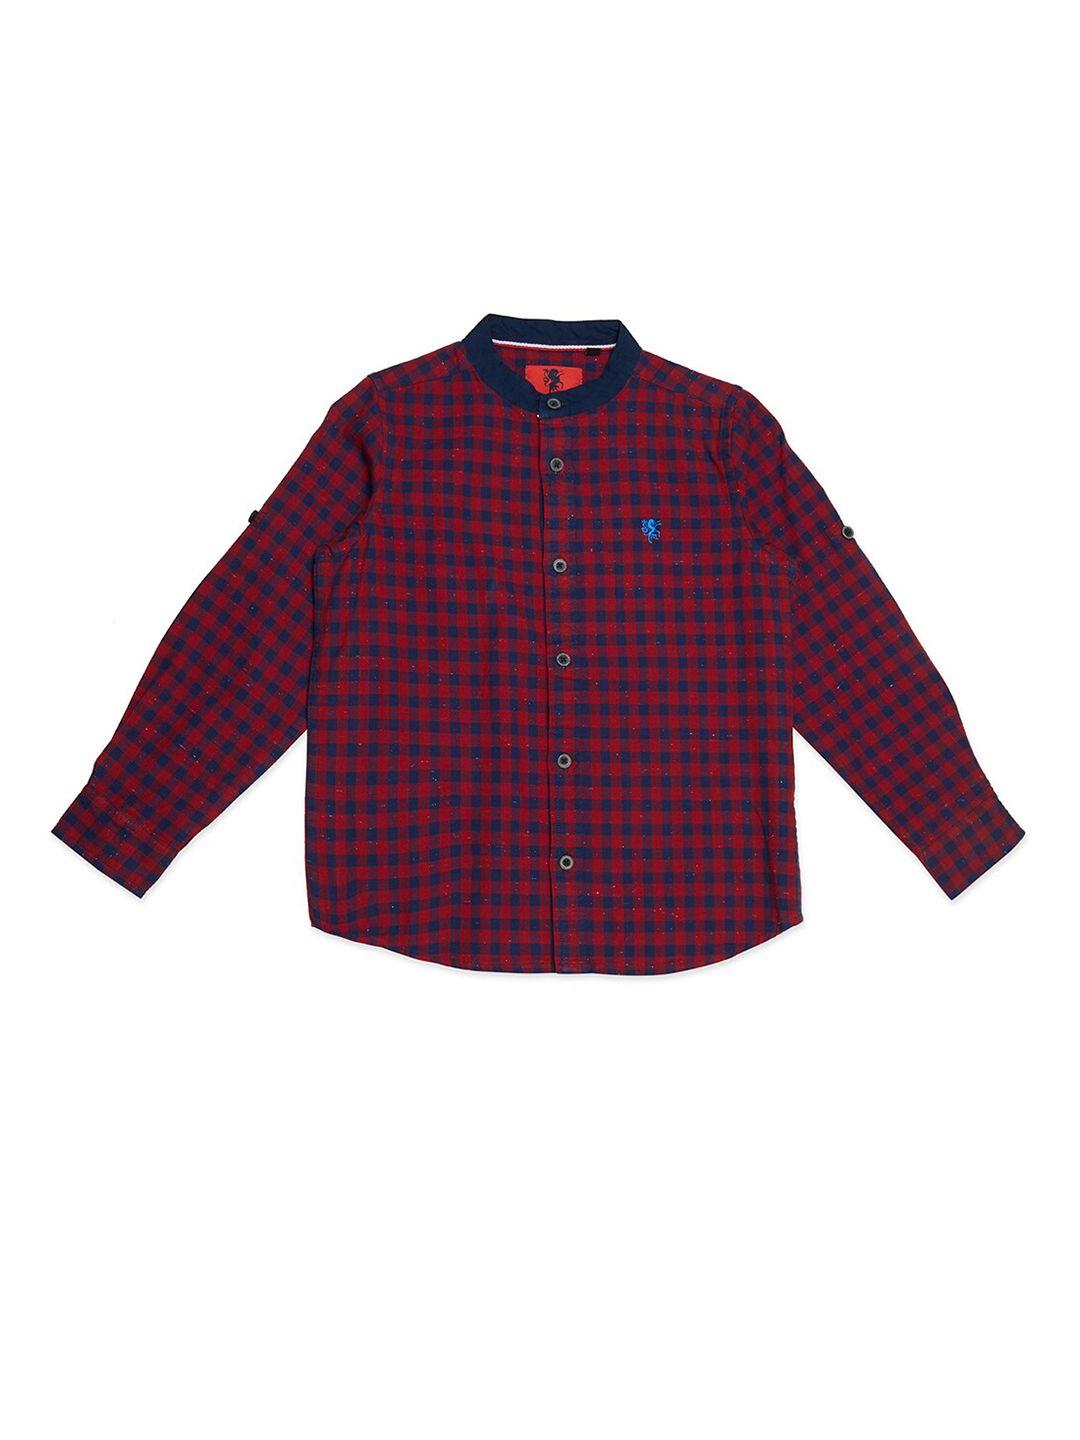 urban scottish boys red & navy blue checked pure cotton casual shirt